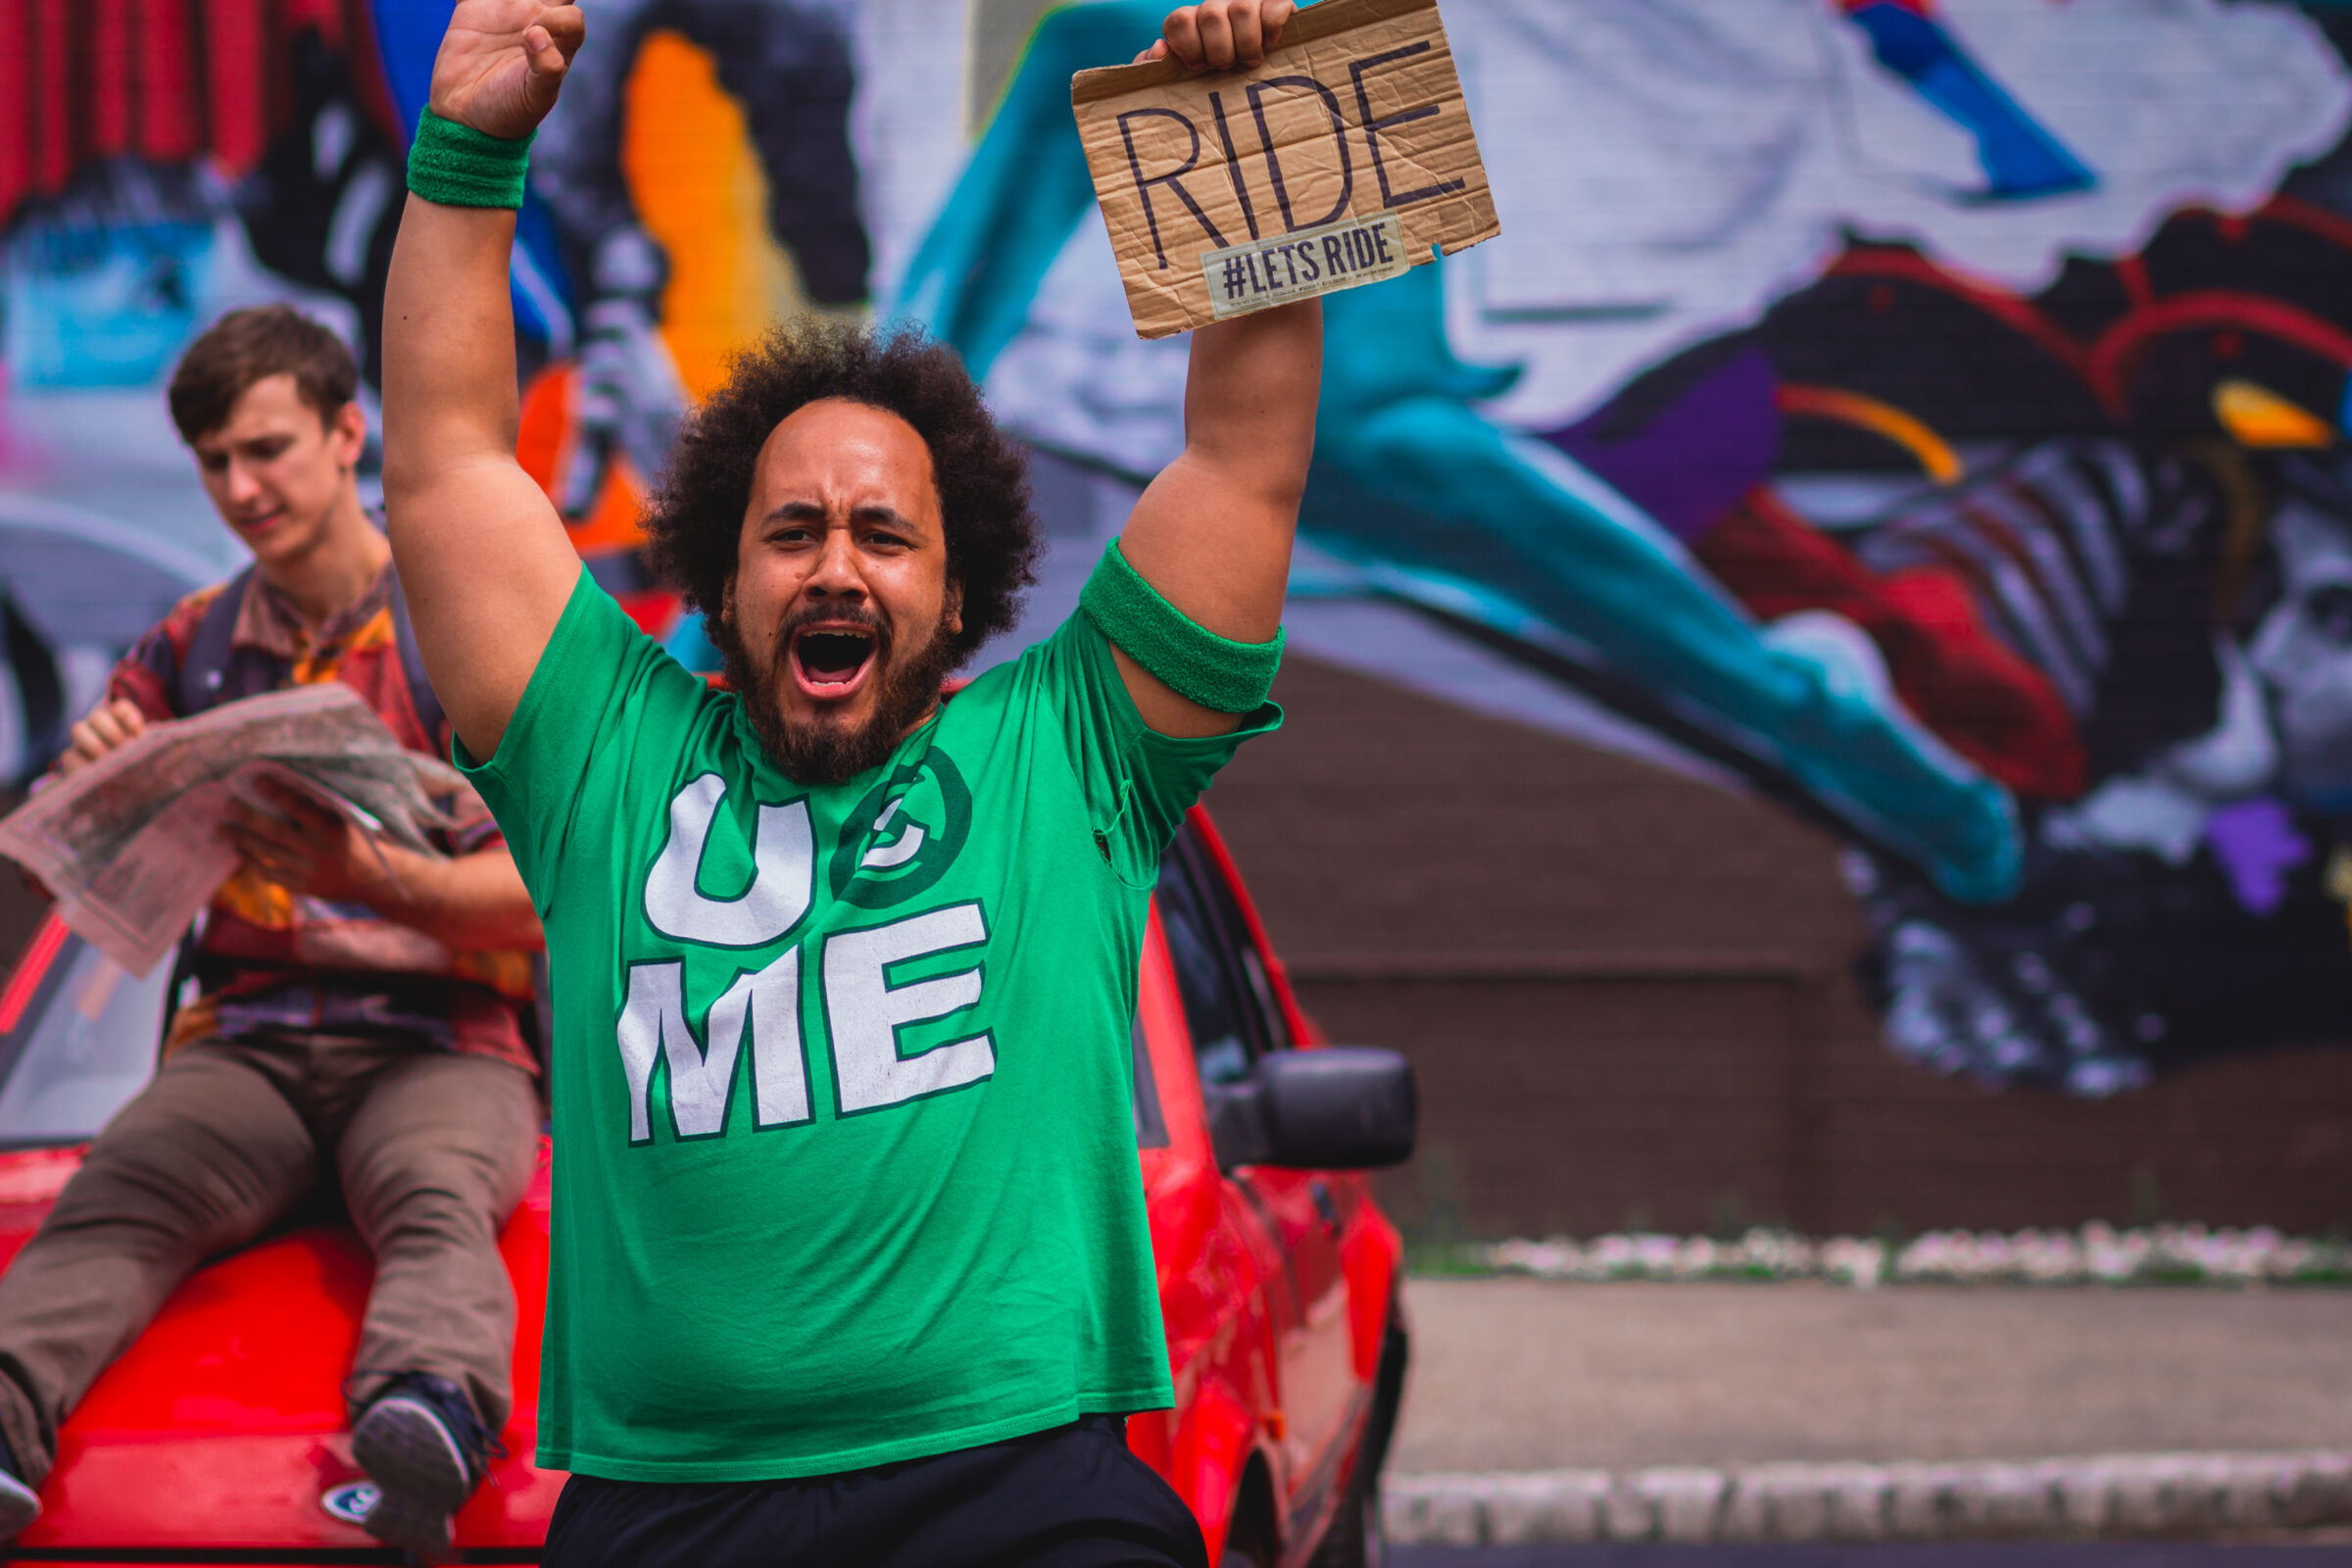 A man in a green tshirt stands with his arms in the air in front of a red car